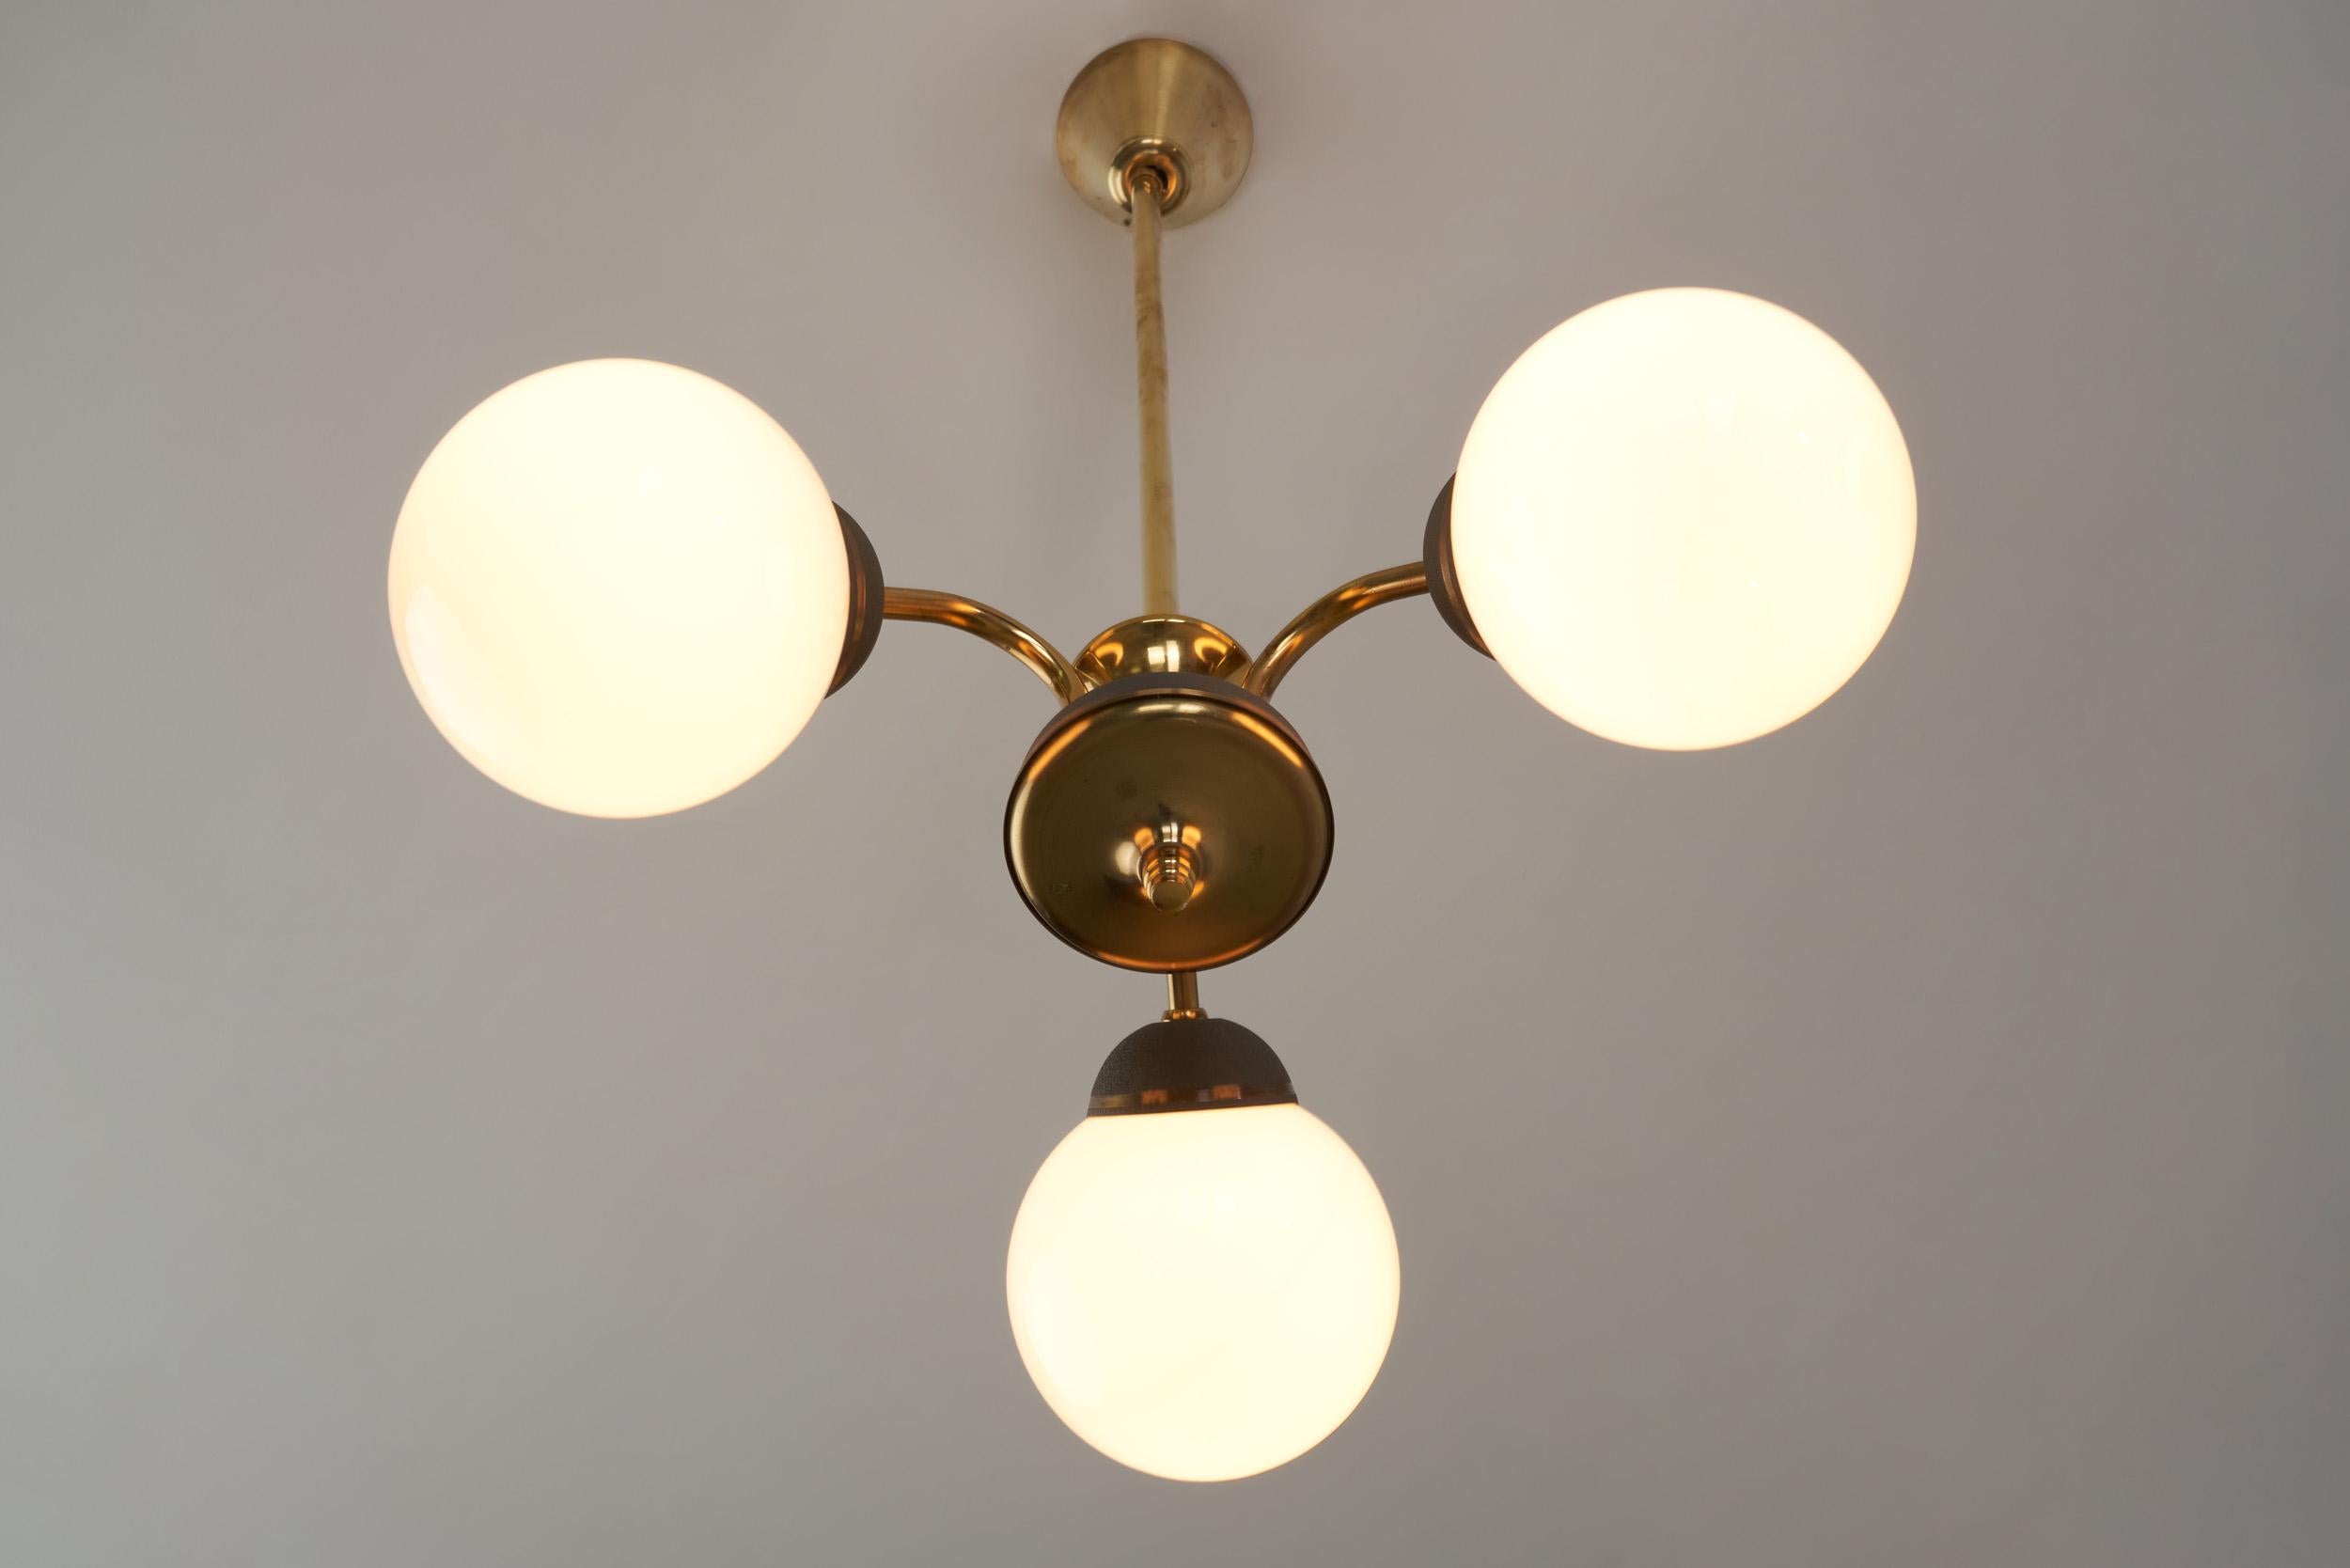 Brass Three-Armed Ceiling Lamp with Opal Glass Shades, Scandinavia 1950s For Sale 7